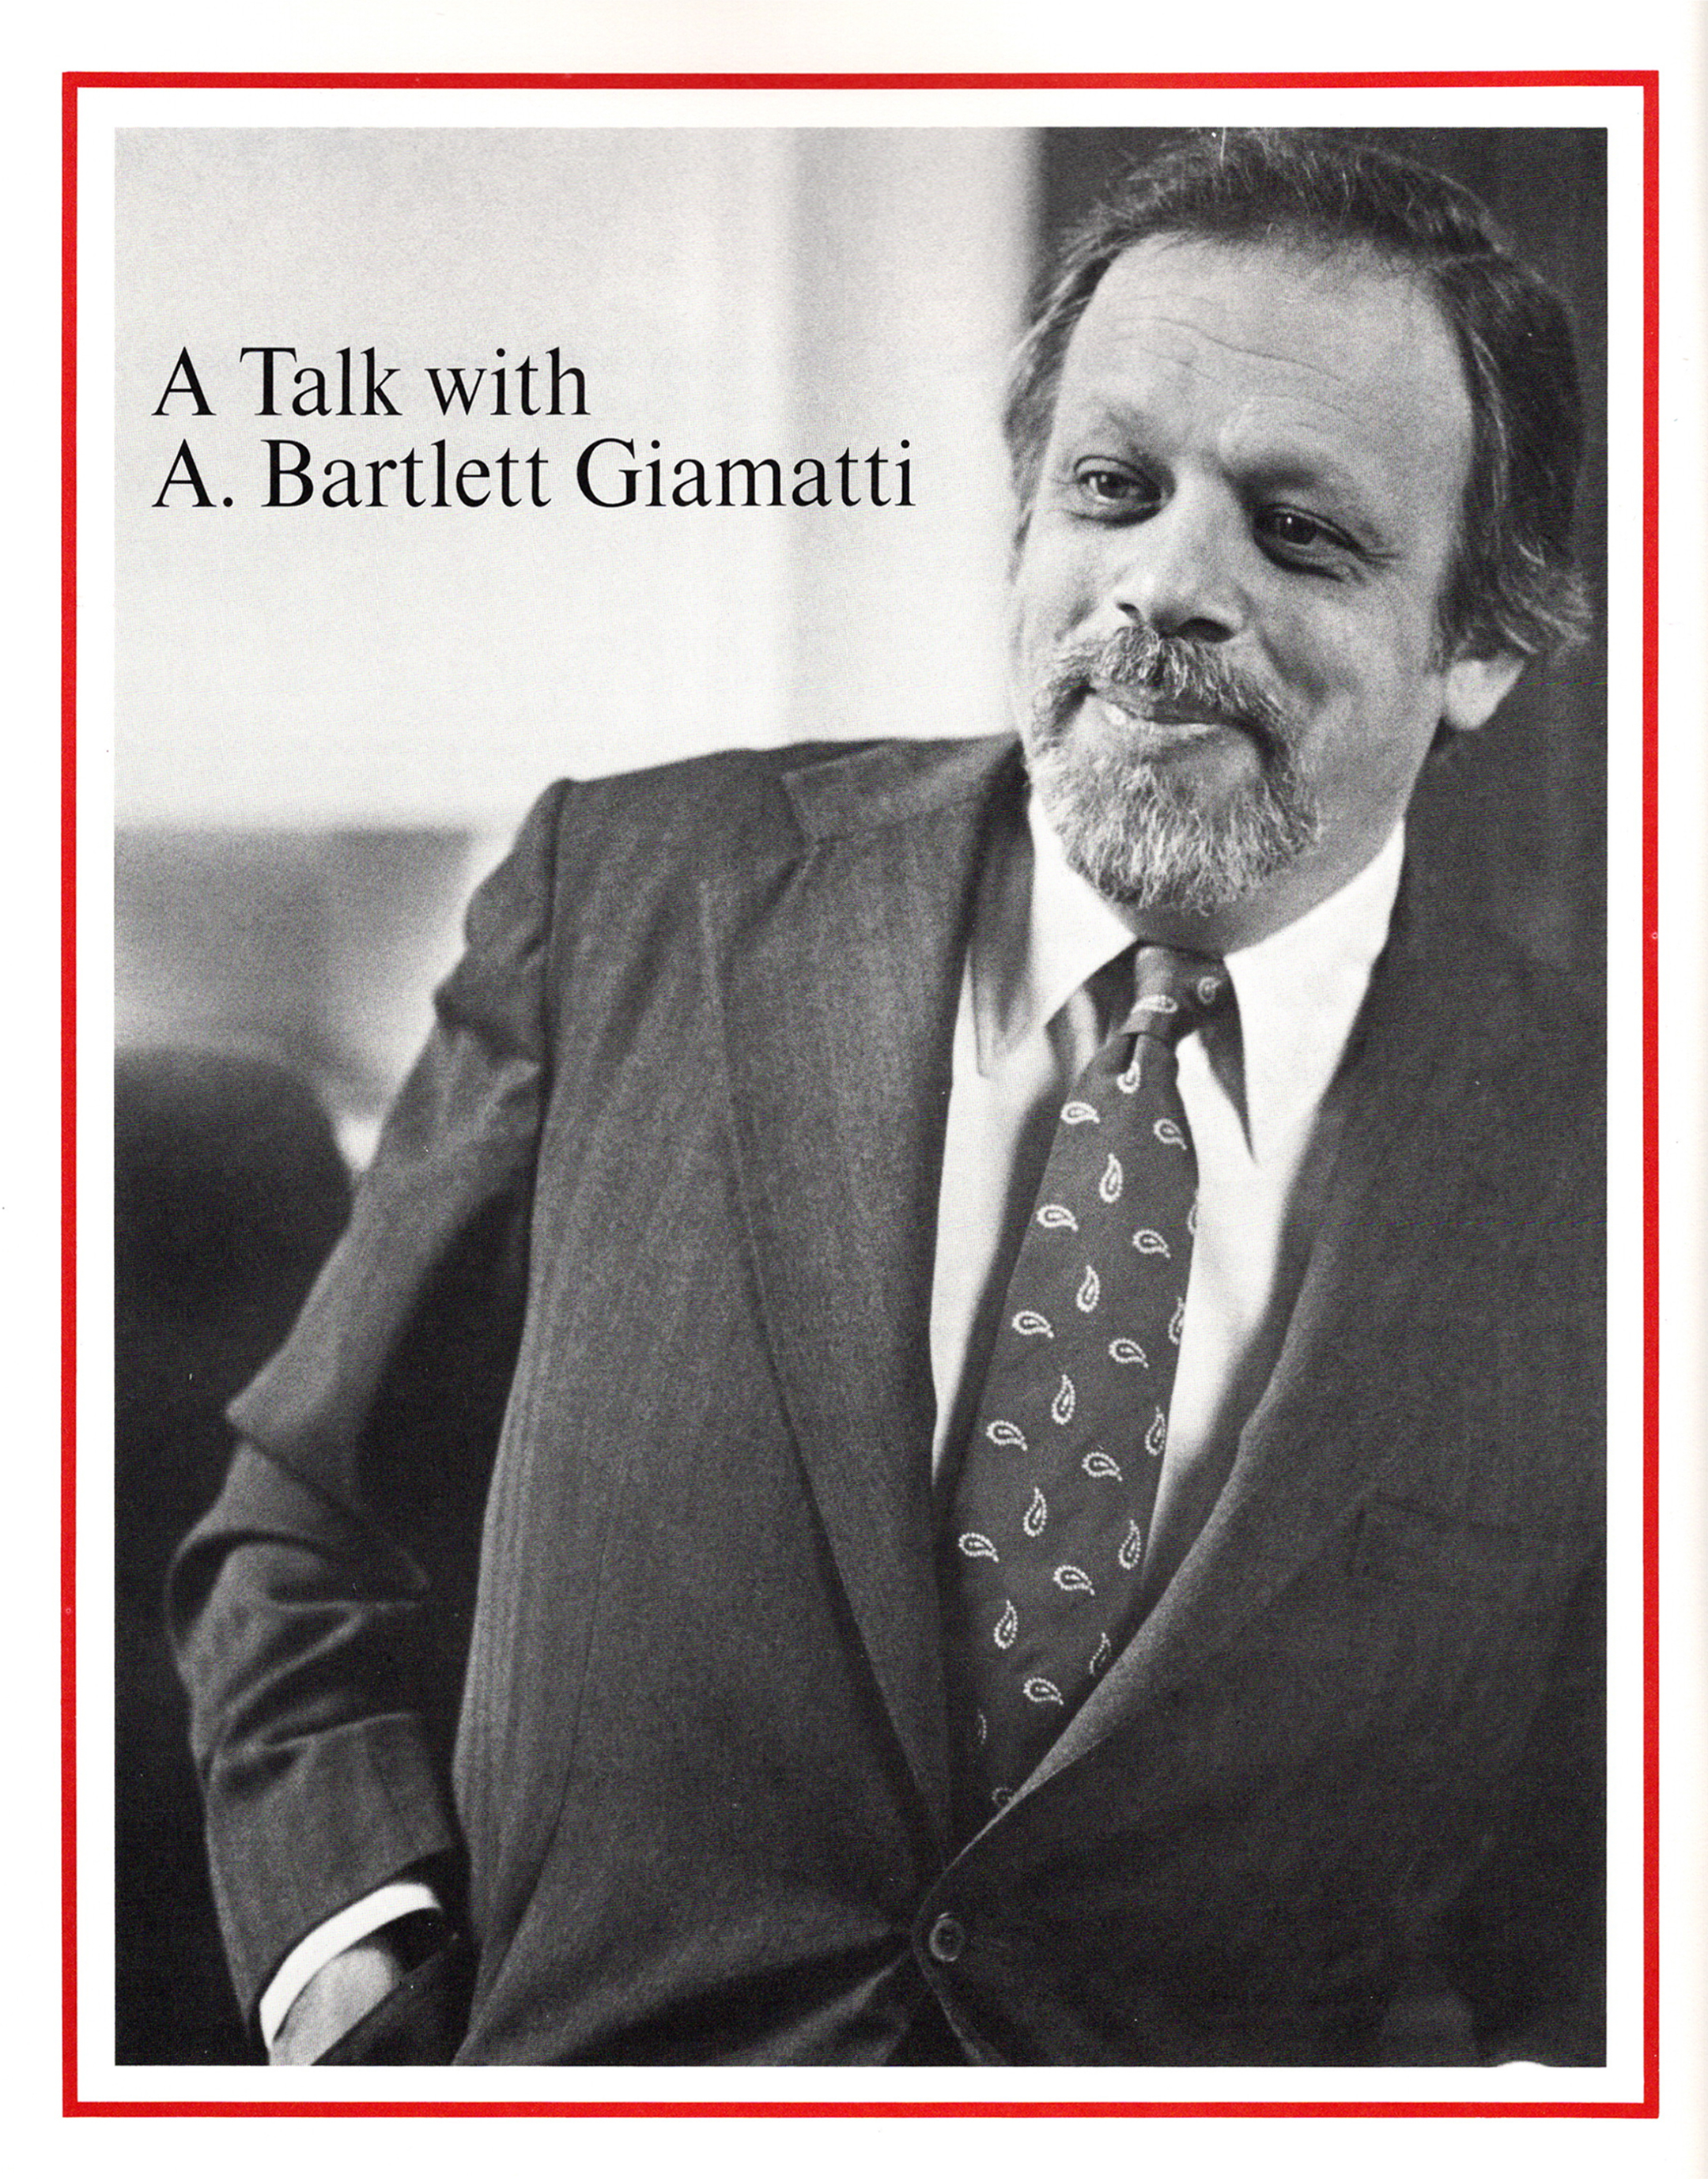 Black and white photo of a grinning A. Bartlett Giamatti with the words "A Talk With A. Bartlett Giamatti" at the top left